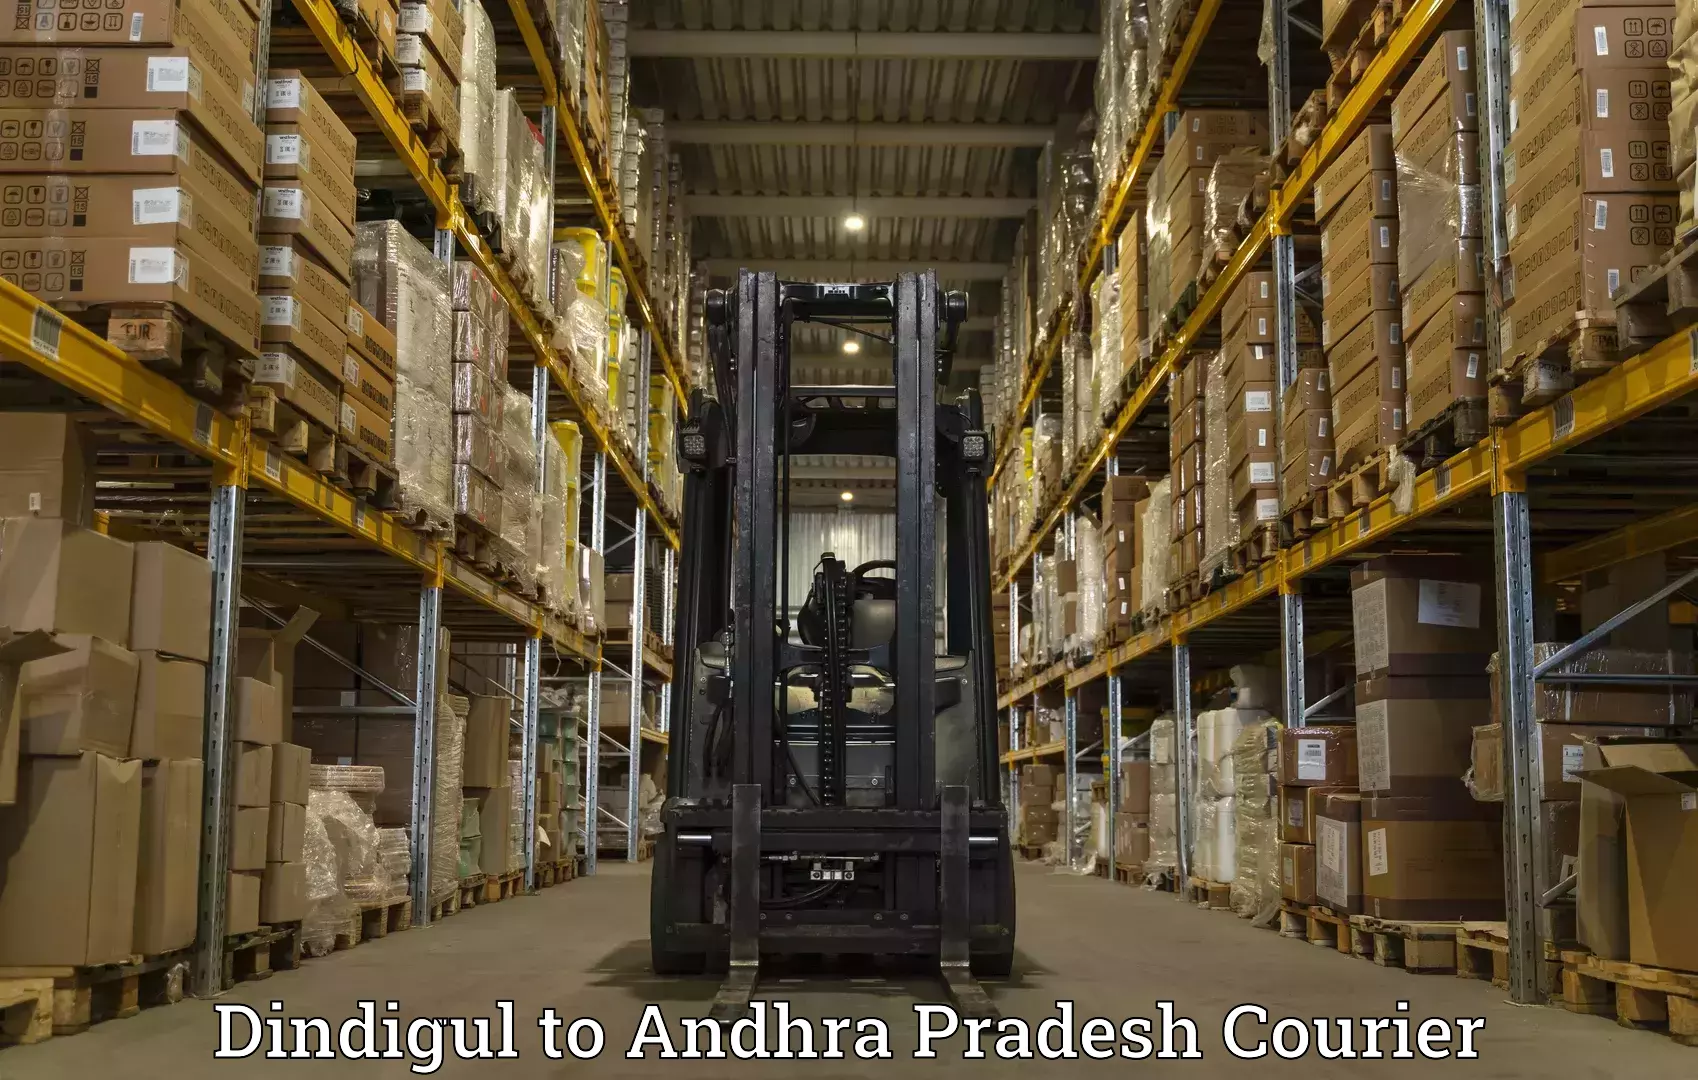 High-speed parcel service Dindigul to Chirala